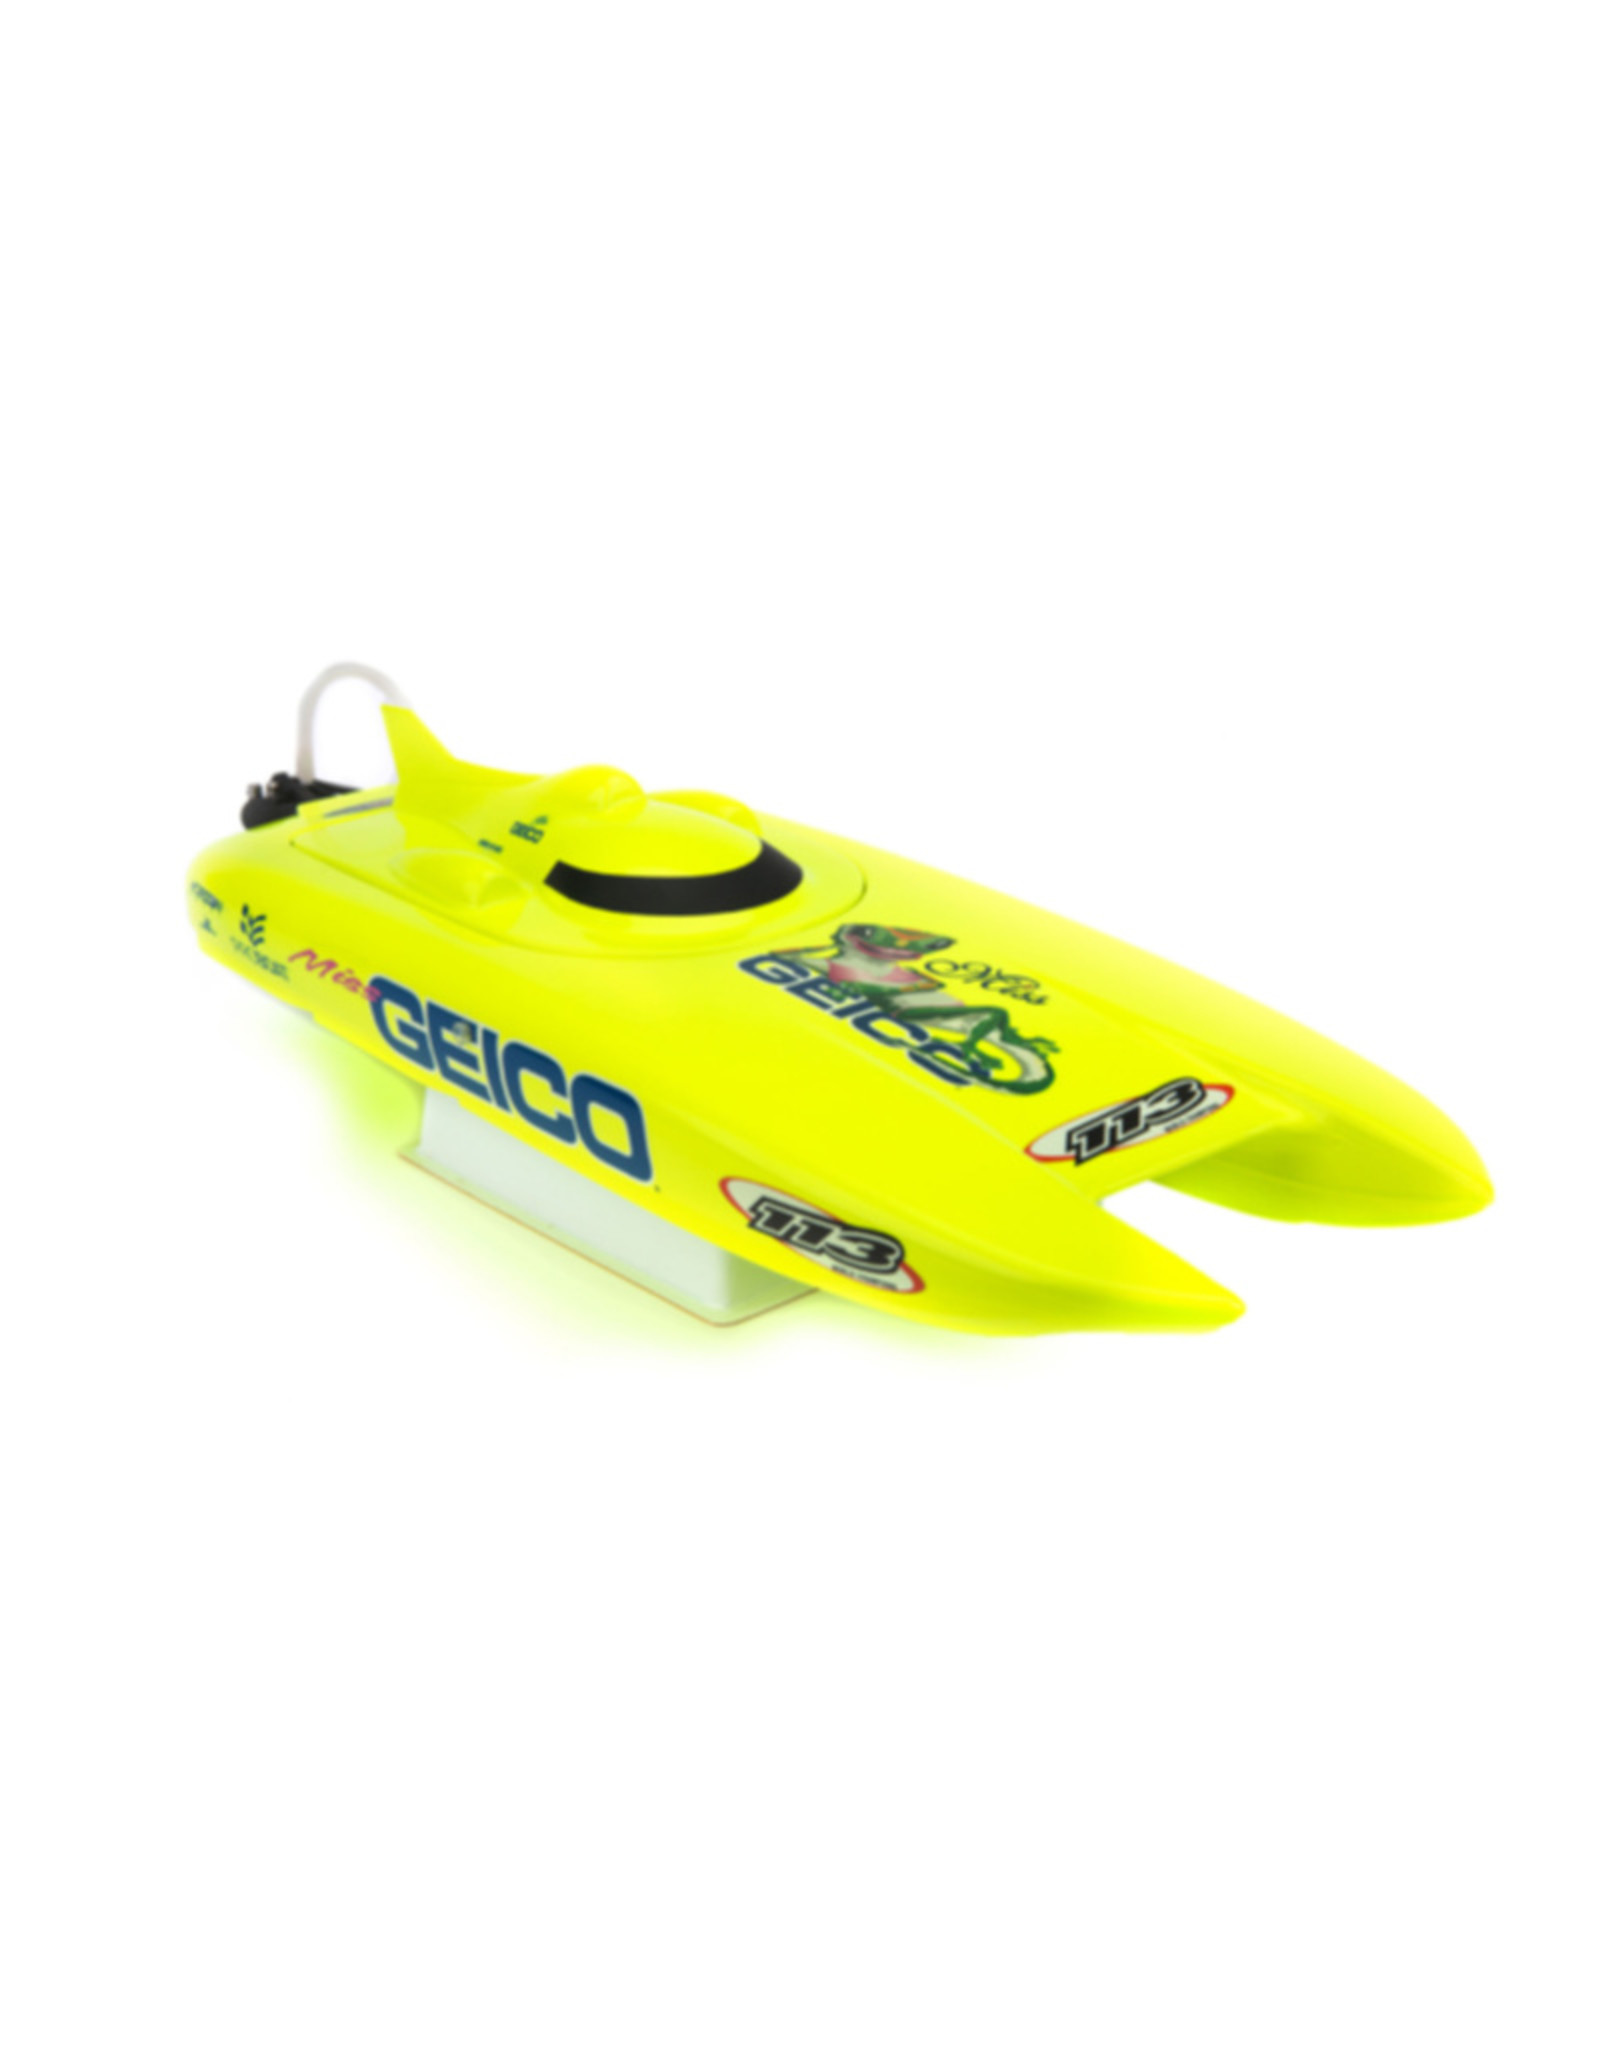 Proboat PRB08019 Miss Geico 17-inch Catamaran Brushed: RTR